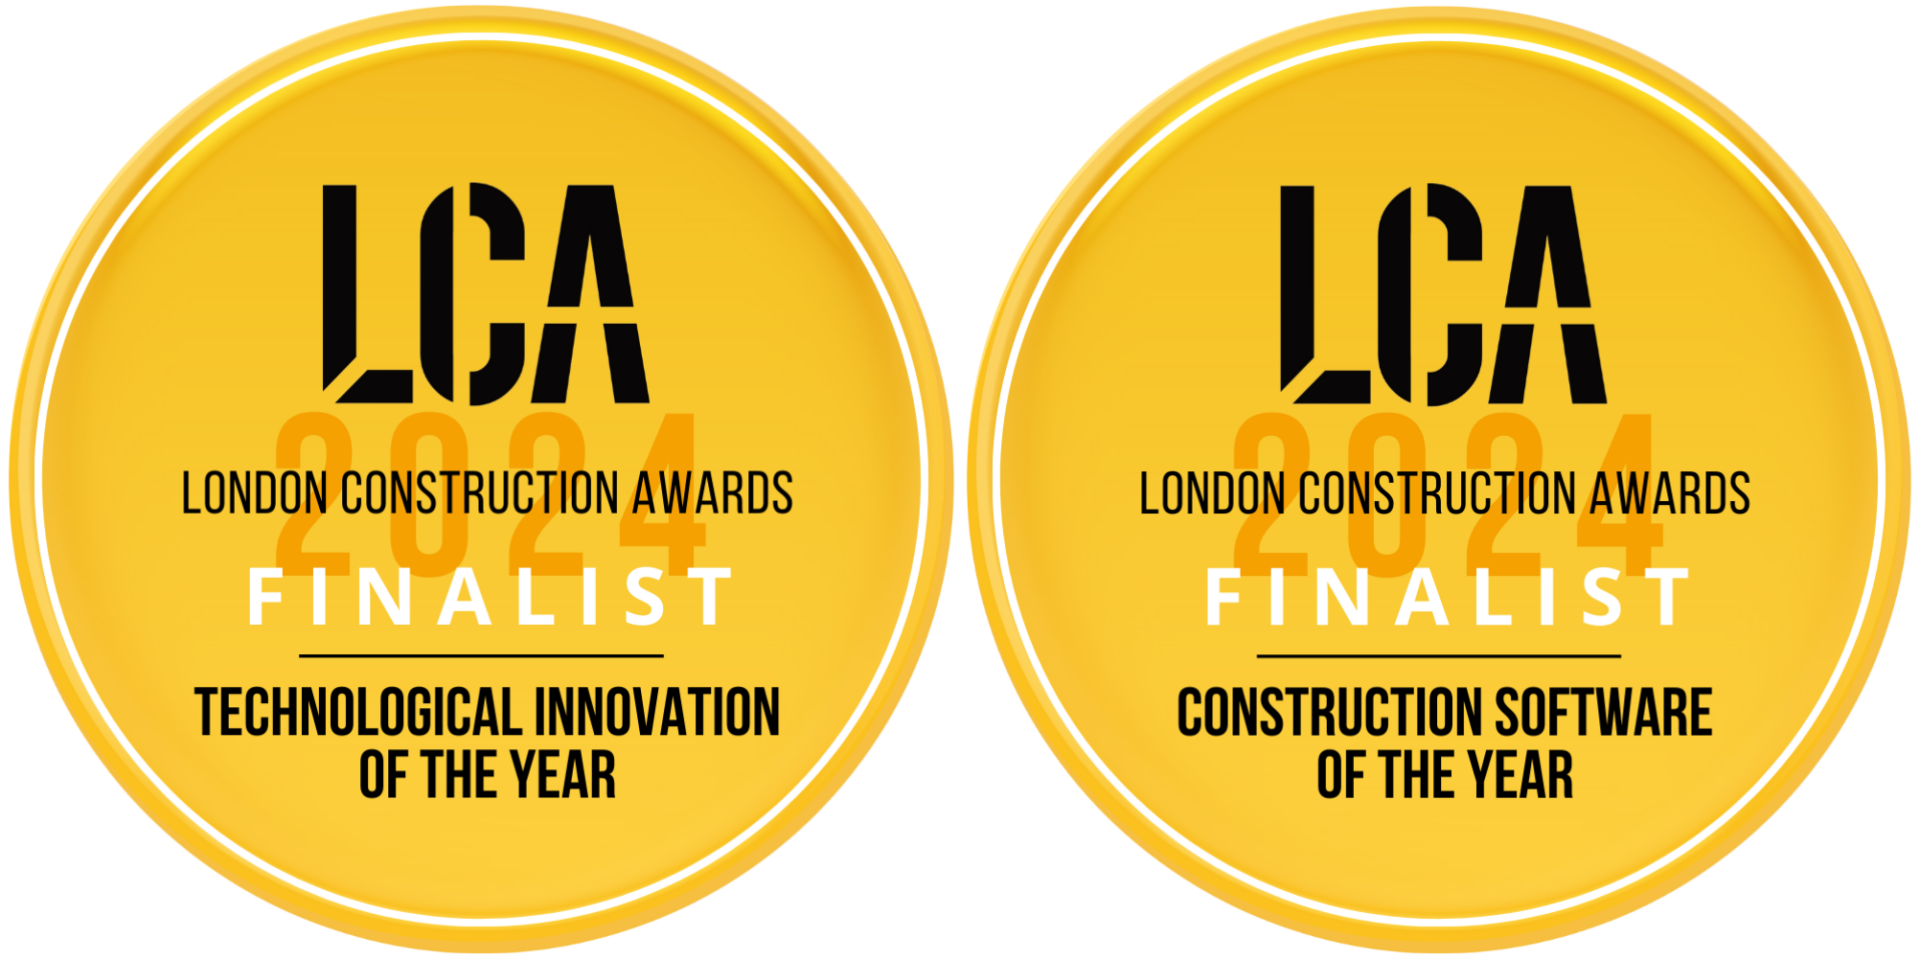 Technological Innovation of the Year and Construction Software of the Year badges for finalists in London Construction Awards